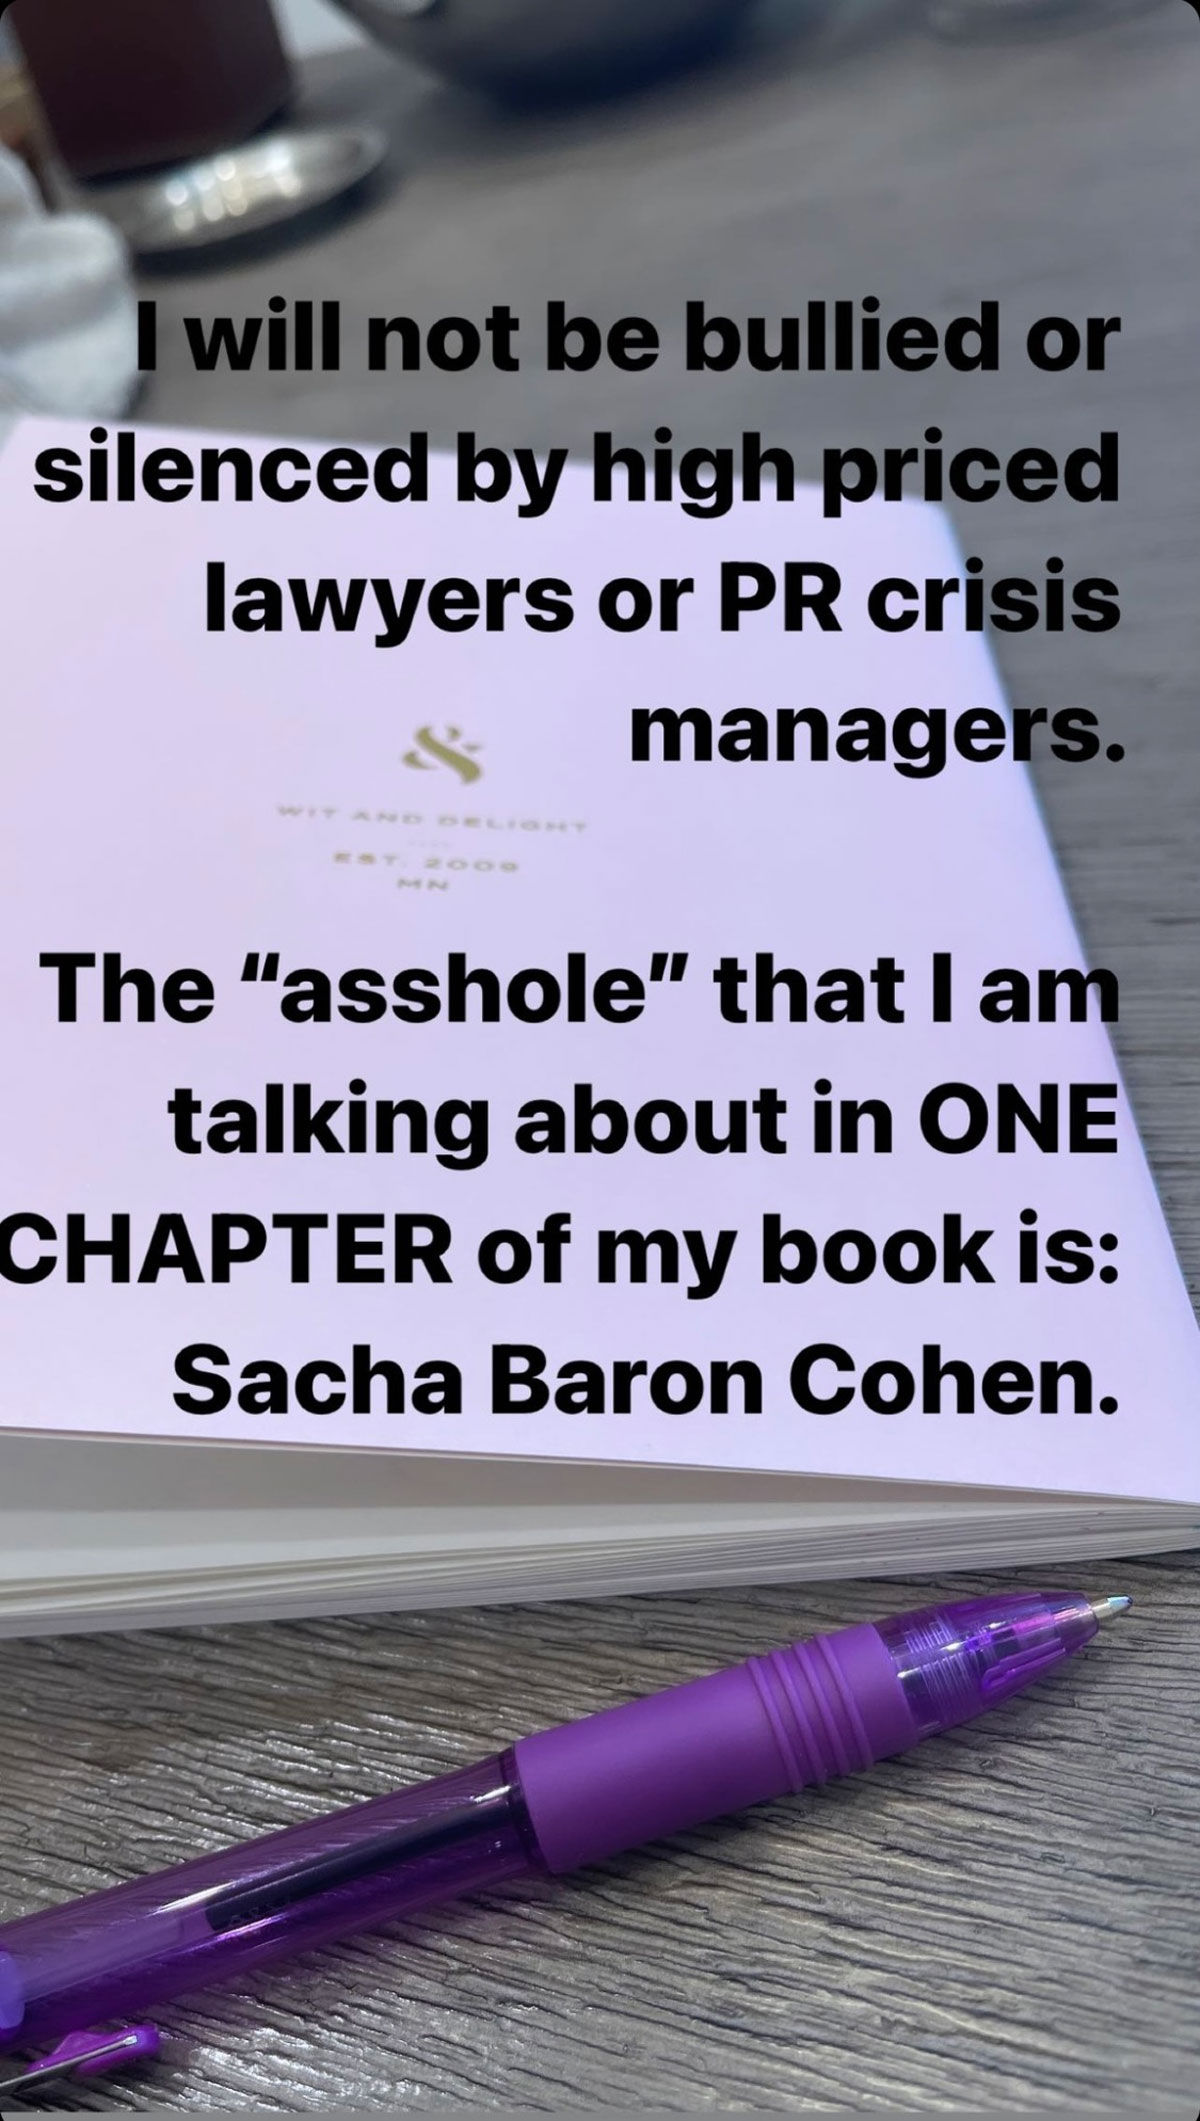 Rebel Wilson Accuses Sacha Baron Cohen Of Being ‘Massive A**Hole’ Trying To ‘Threaten’ Her Over Memoir!